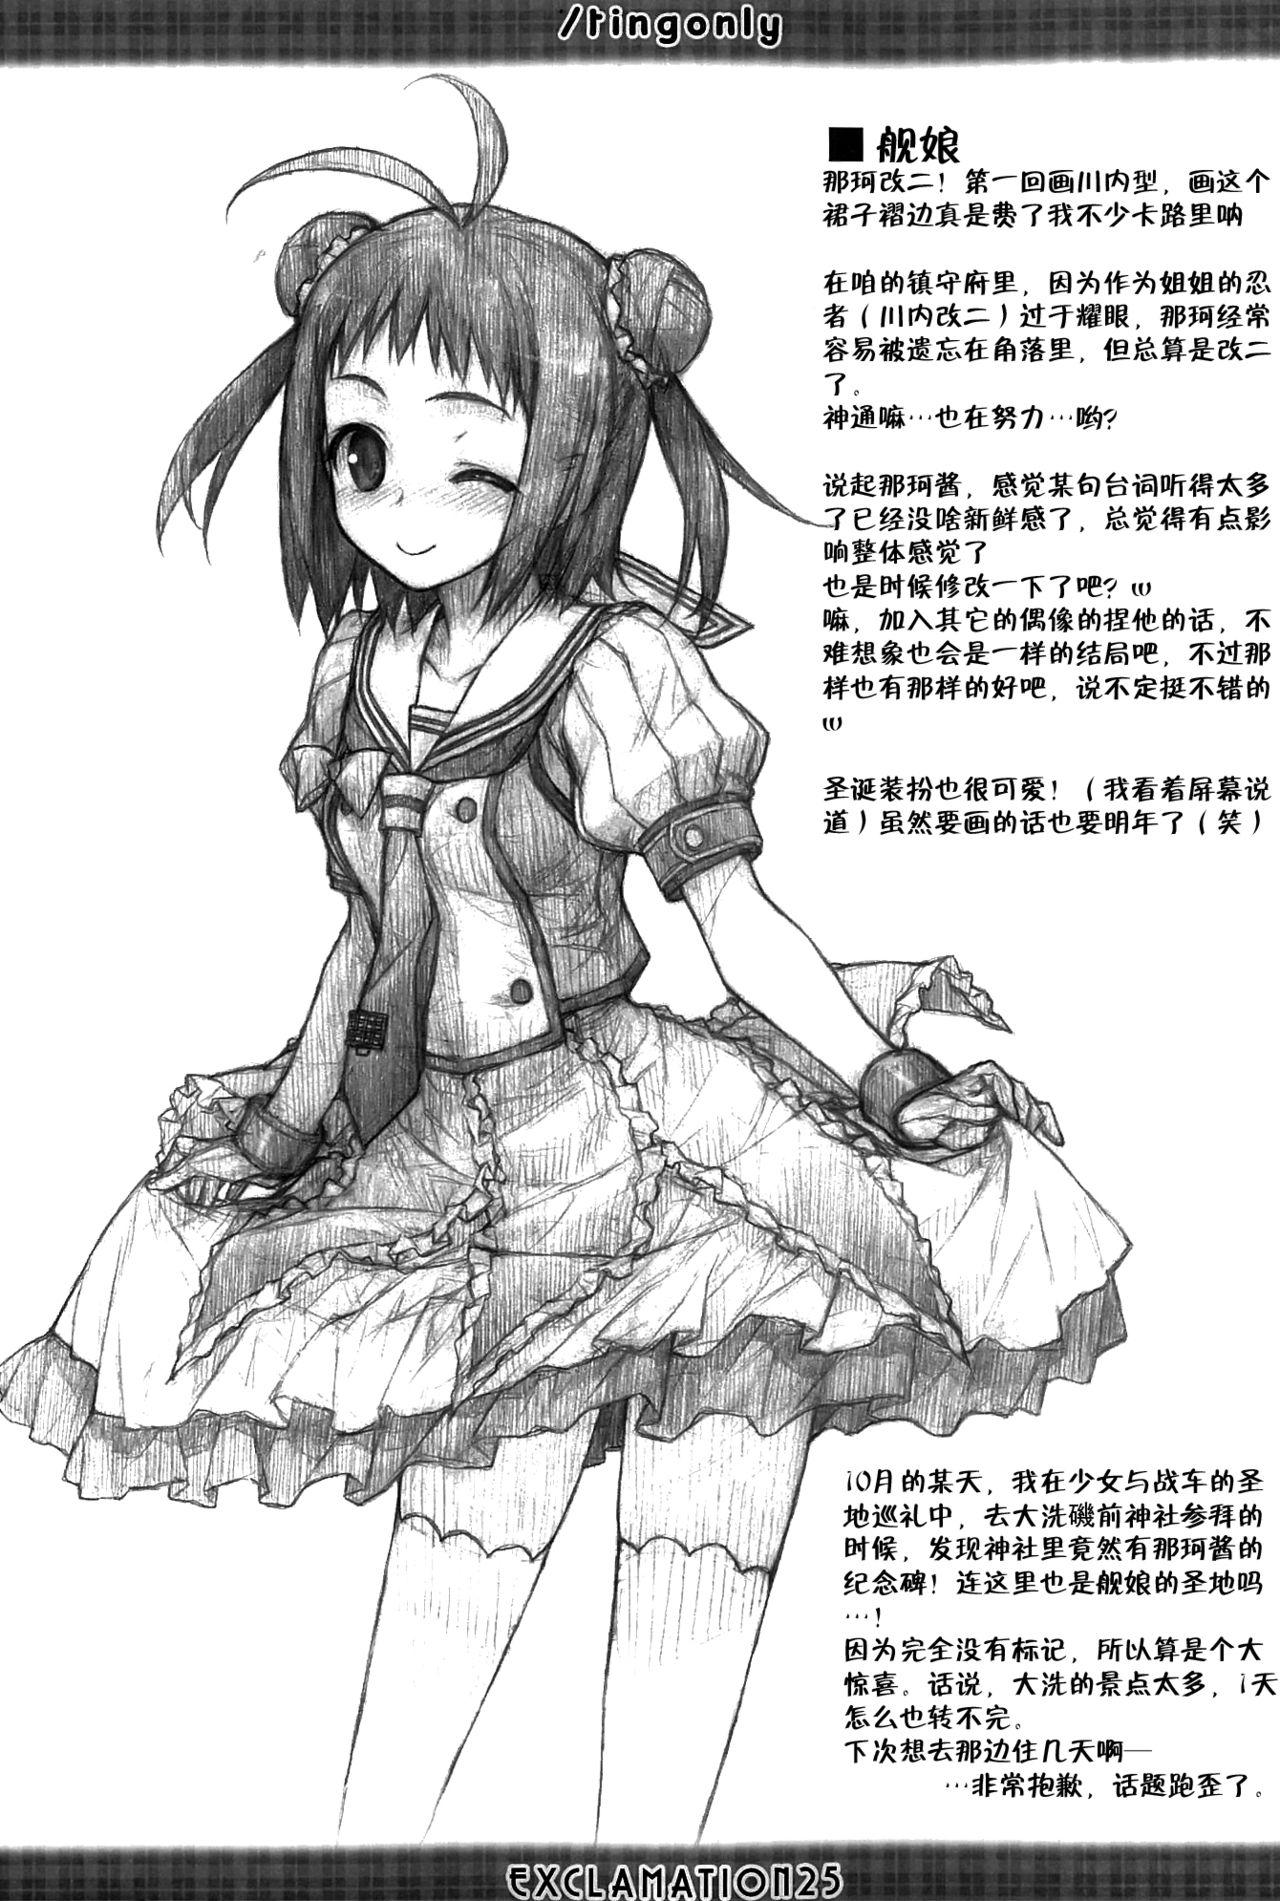 Costume /tingonly - Kantai collection Black - Page 5